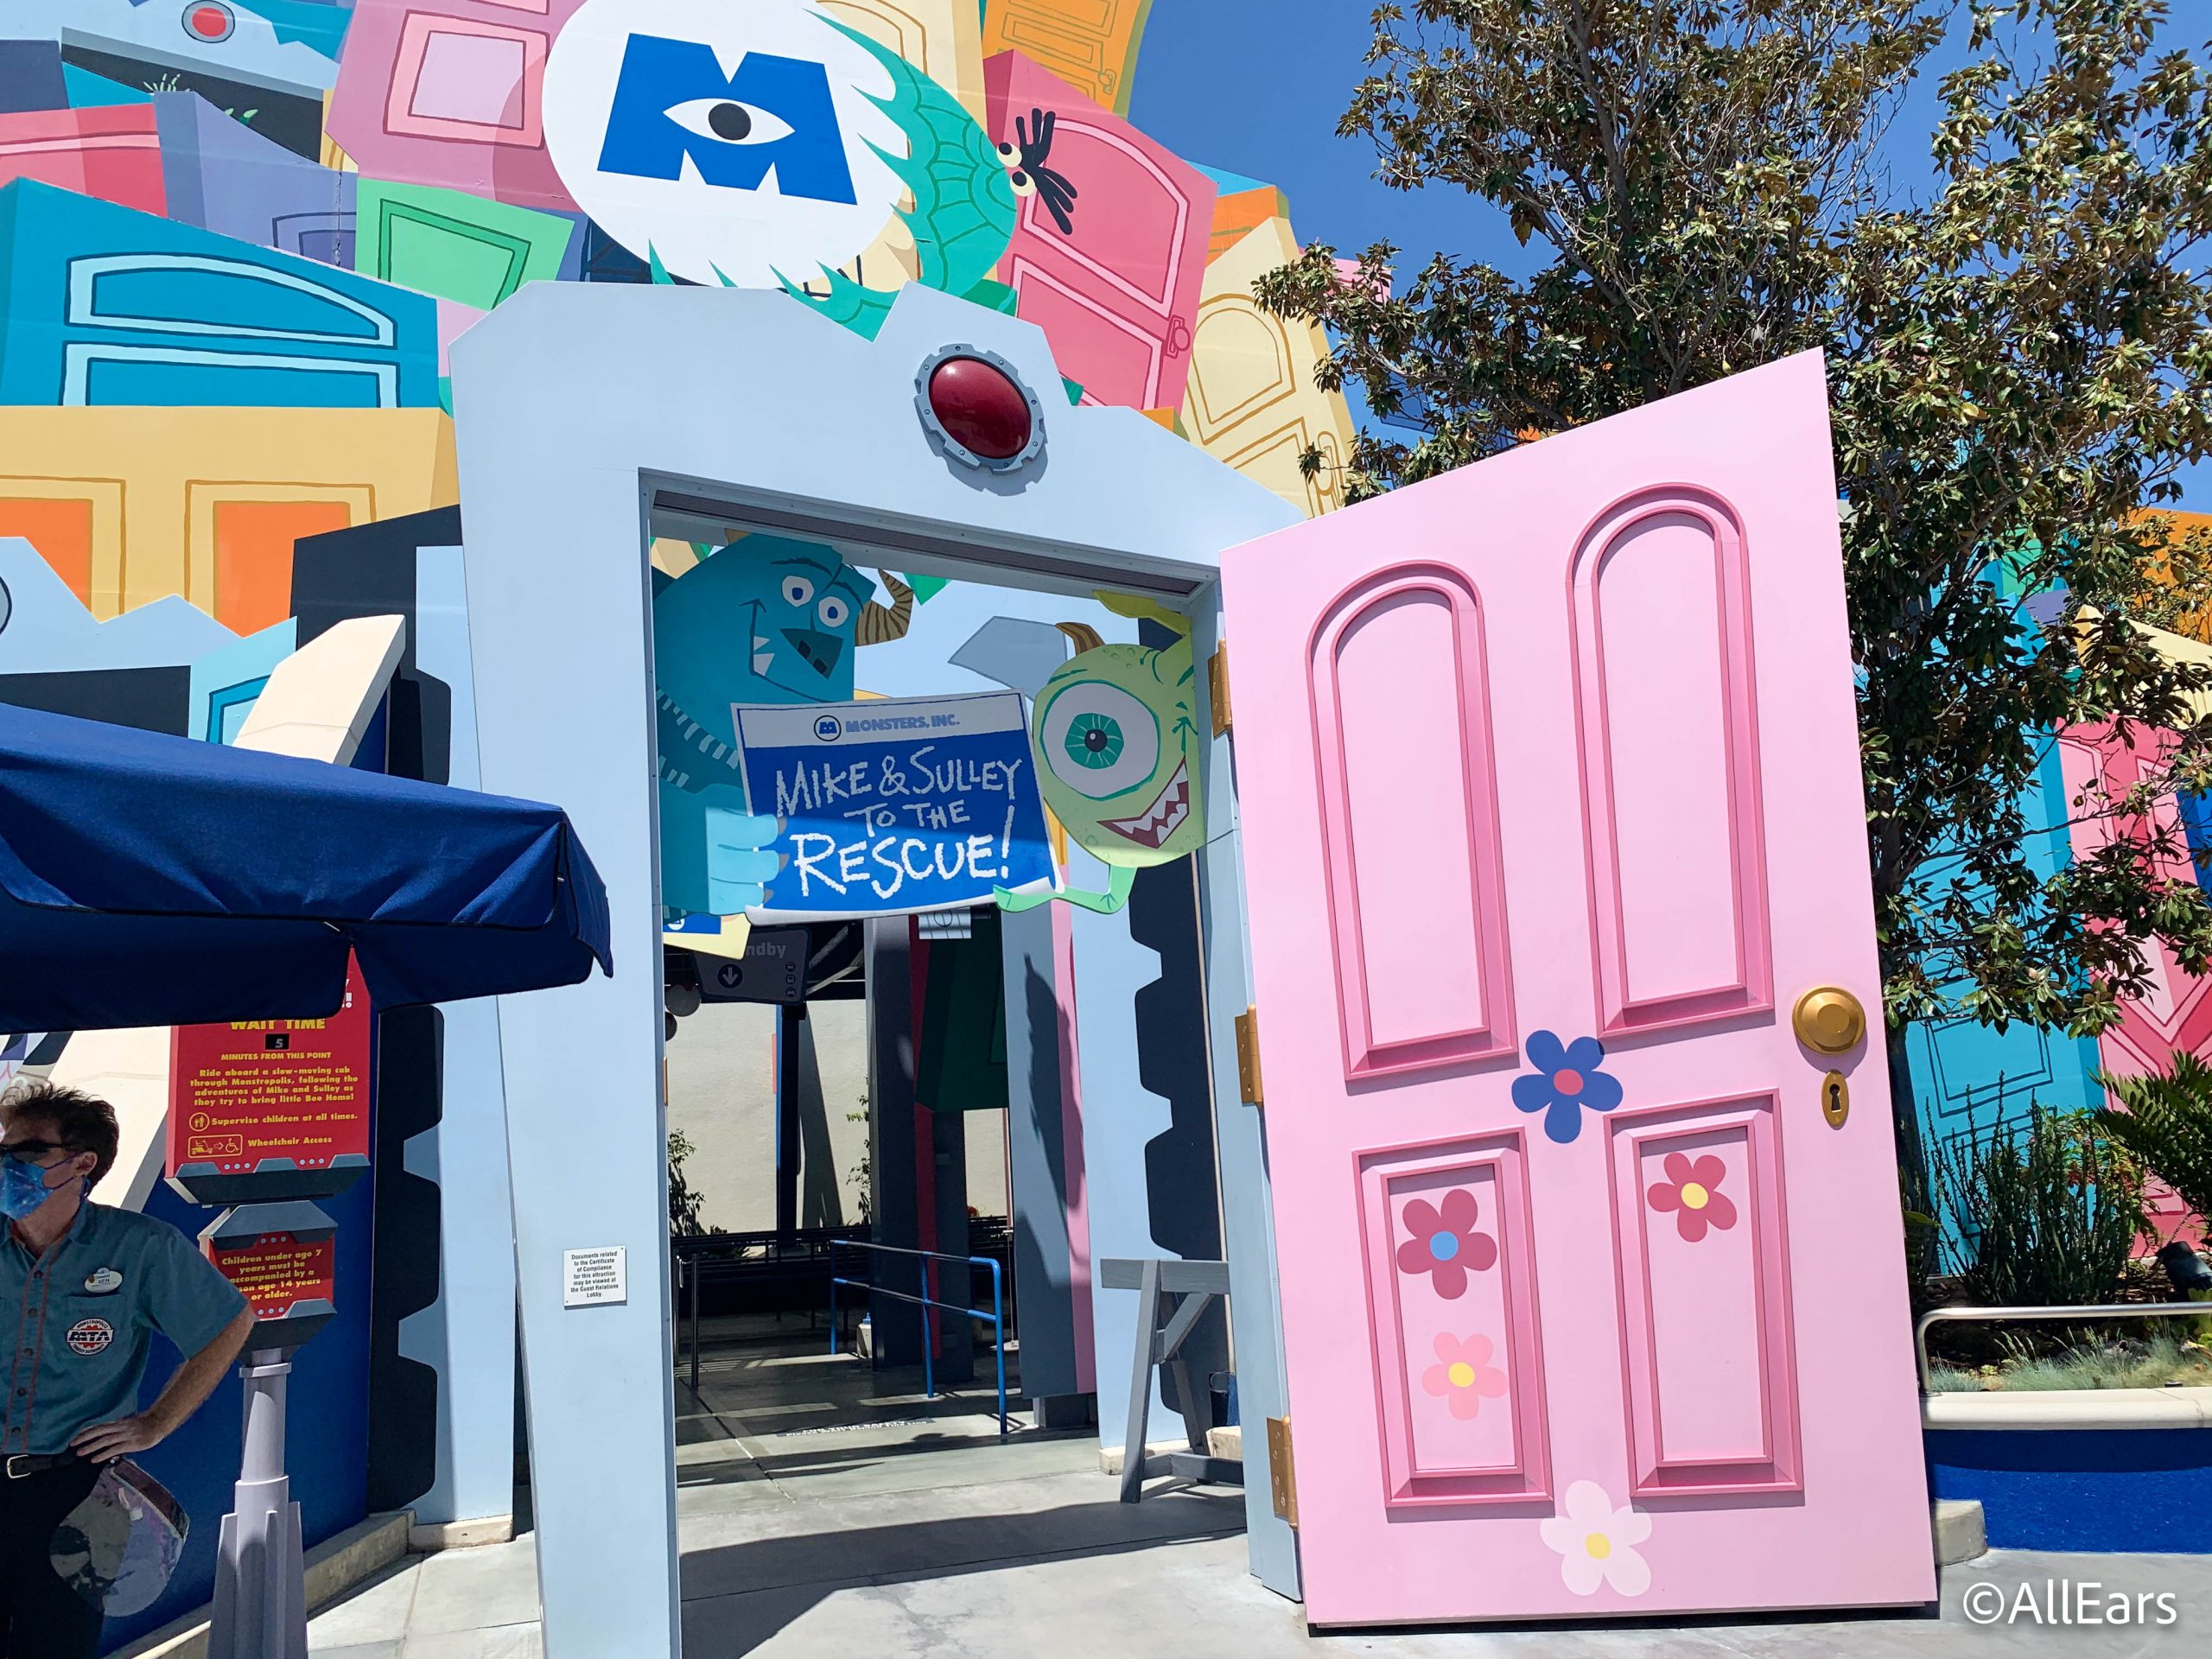 Disney Almost Created a Monsters Inc. Door Coaster - Here's Why